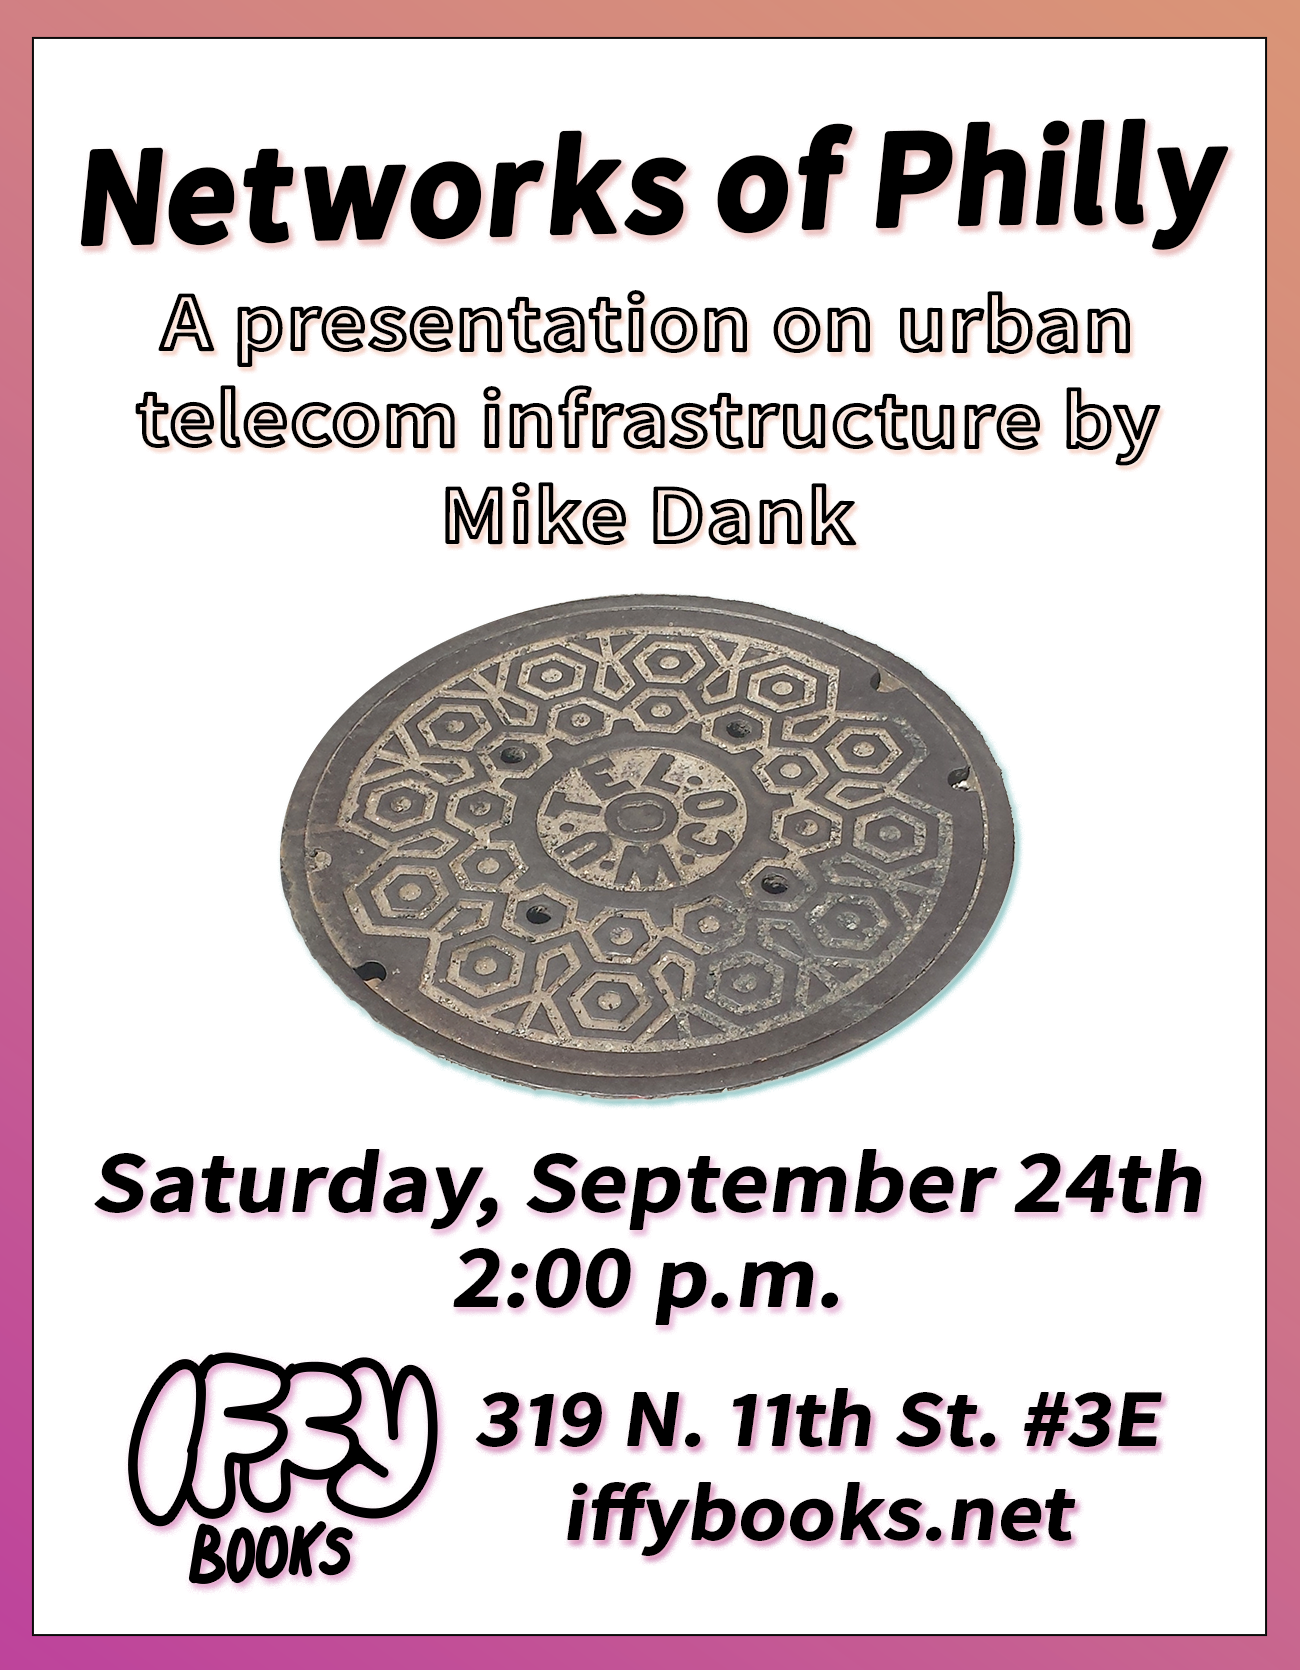 Event flyer with black sans-serif text and a pink-orange gradient around the border. The text reads "Networks of Philly / A presentation on urban telecon infrastructure by Mike Dank / Saturday, September 24th / 2:00 p.m. / Iffy Books / 319 N. 11th St. #3E (3rd floor)." In the middle of the flyer there's a manhole cover with a hexagon pattern and the inscription "W•U•Tel•Co"